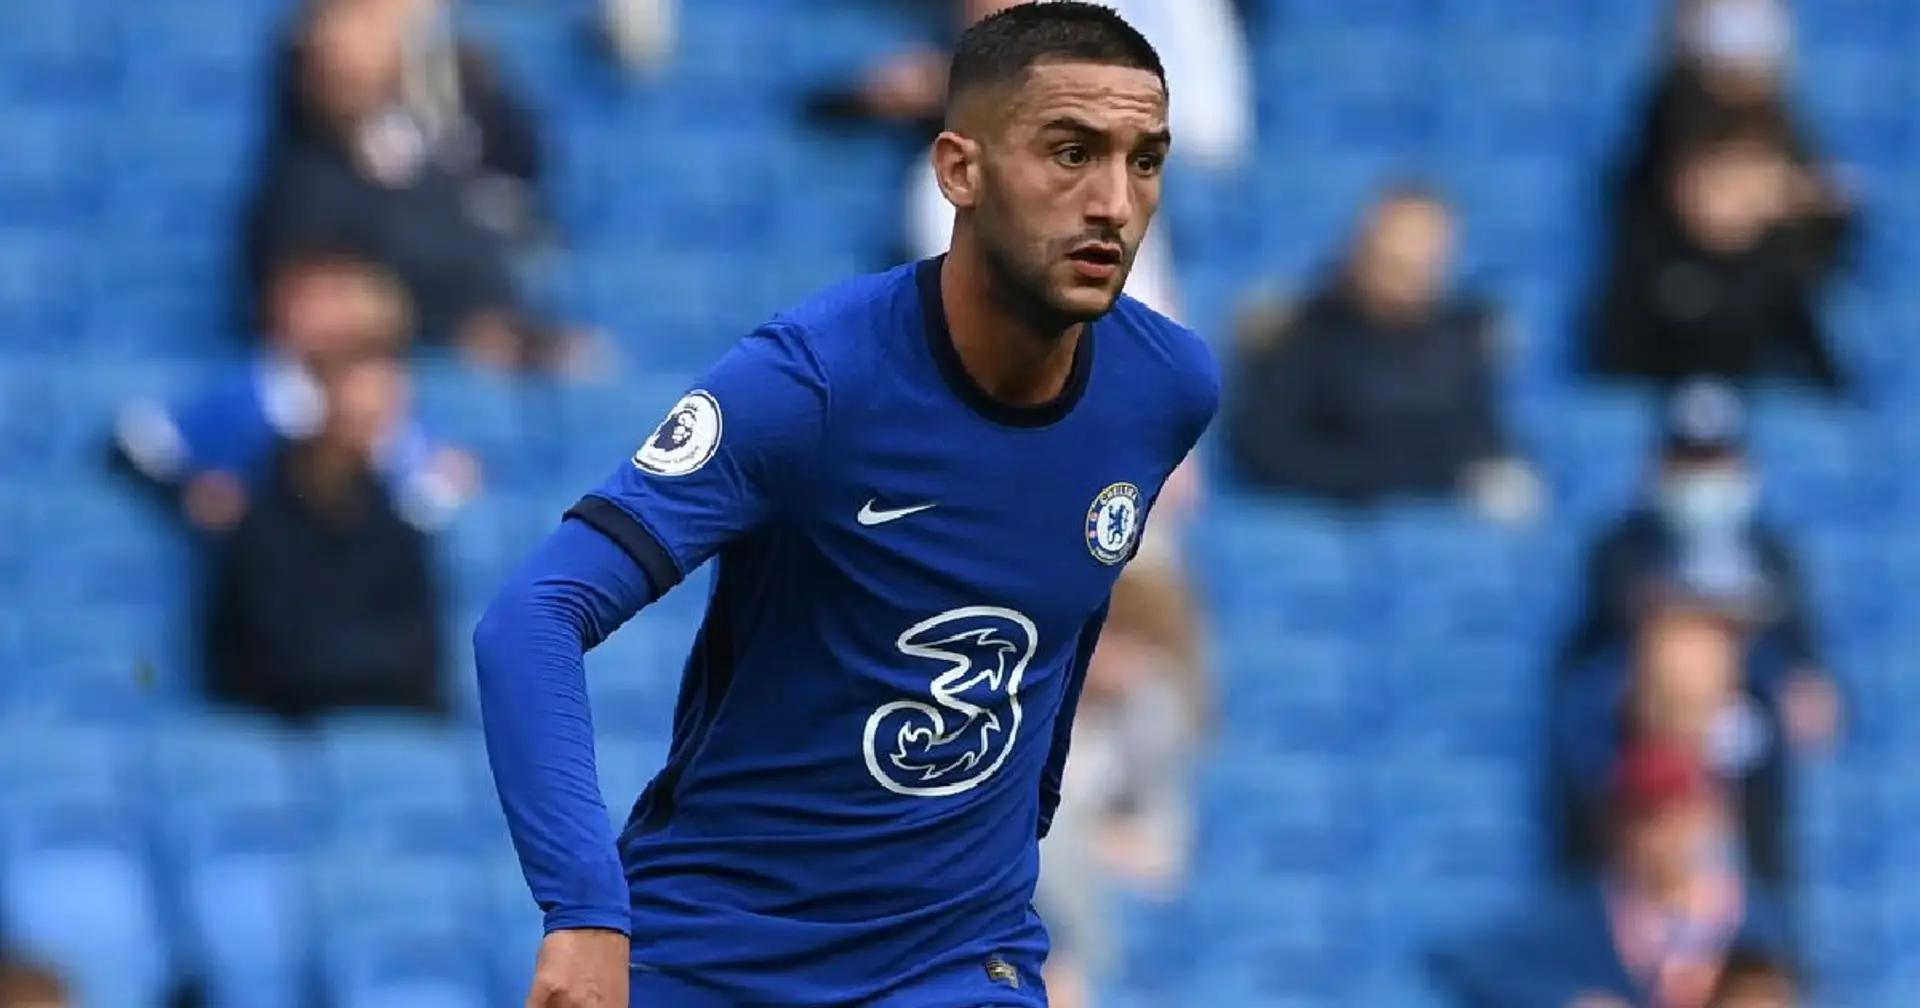 'Man Utd played more not to lose than Chelsea': Ex-Blue Hasselbaink on United draw and Ziyech's missed opportunity